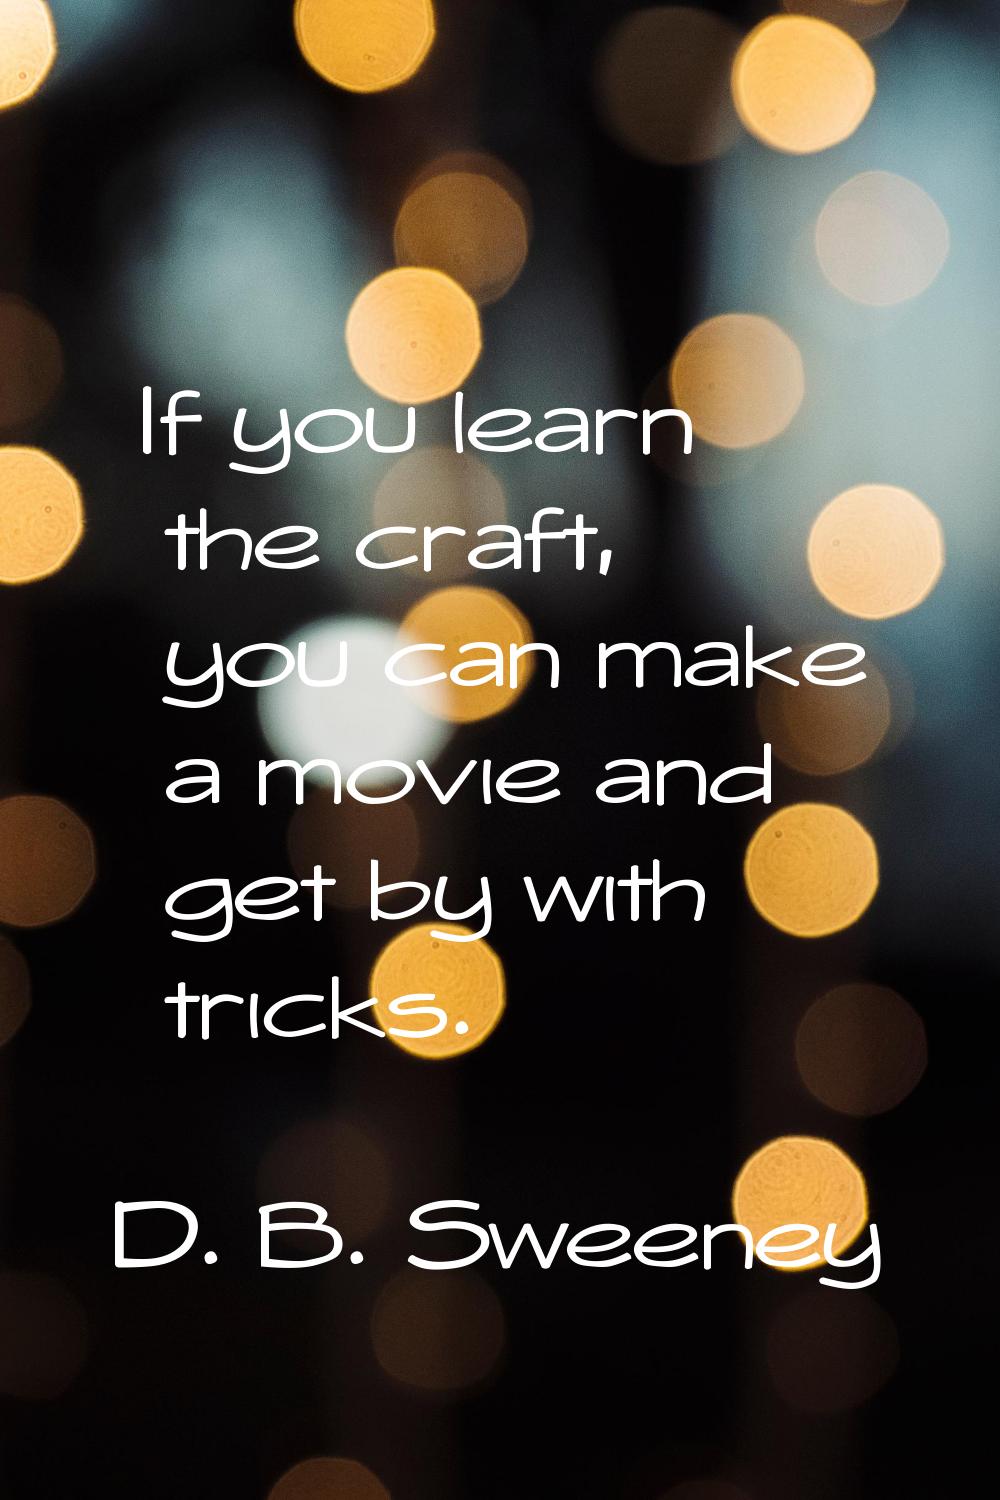 If you learn the craft, you can make a movie and get by with tricks.